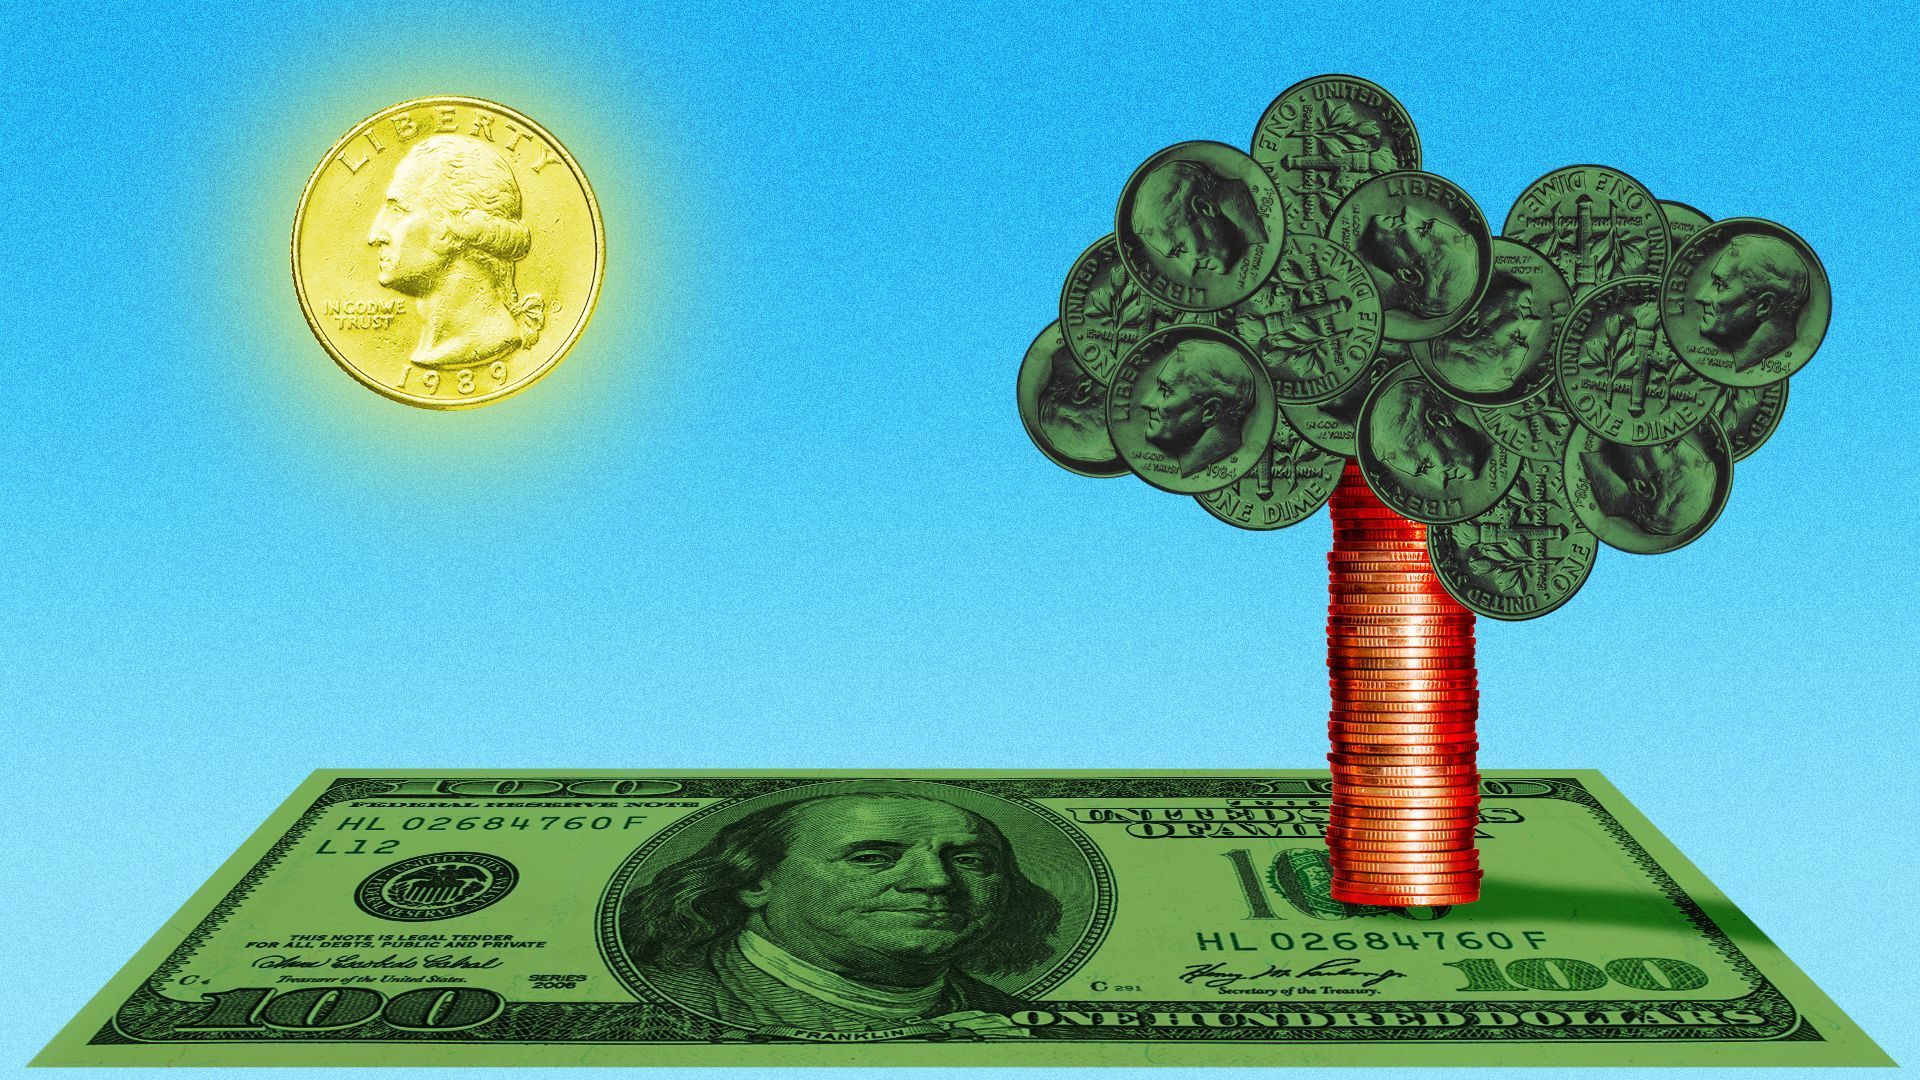 Illustration of a landscape made from money, with a one hundred dollar bill as the grass, a stack of pennies and cluster of dimes as a tree, and a quarter for the sun. 